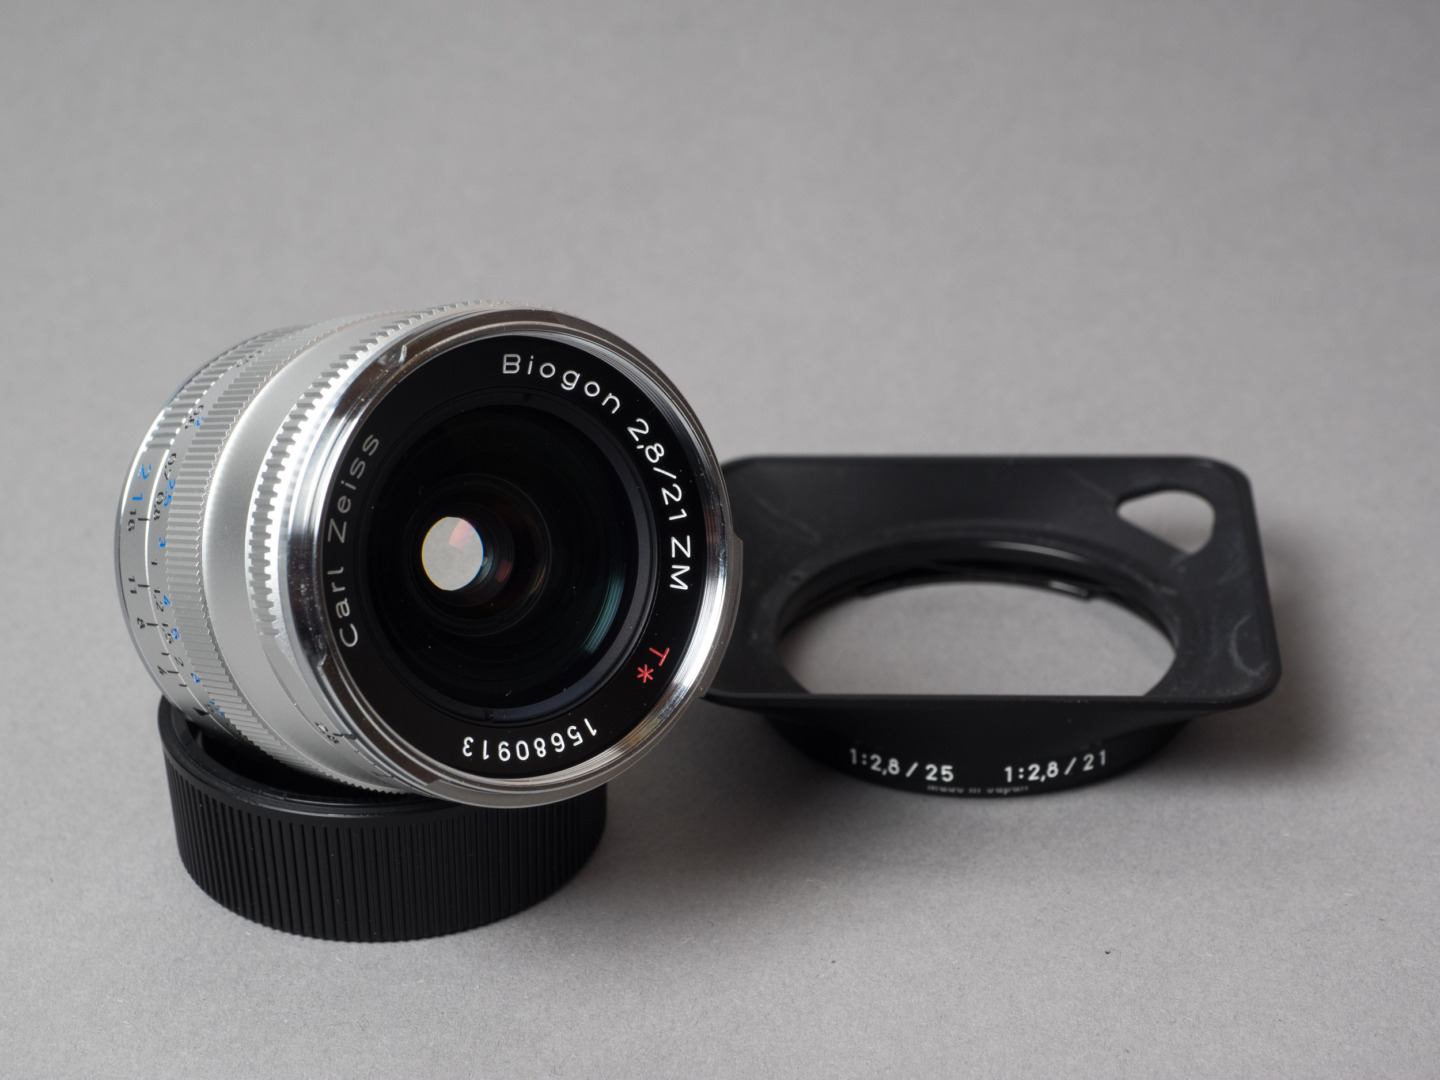 In a sentence: The Zeiss Biogon 21/2.8 ZM, here with its separately sold hood, is an excellent wide angle-lens that will give you great results both on a modern digital rangefinder and on any film M mount camera.